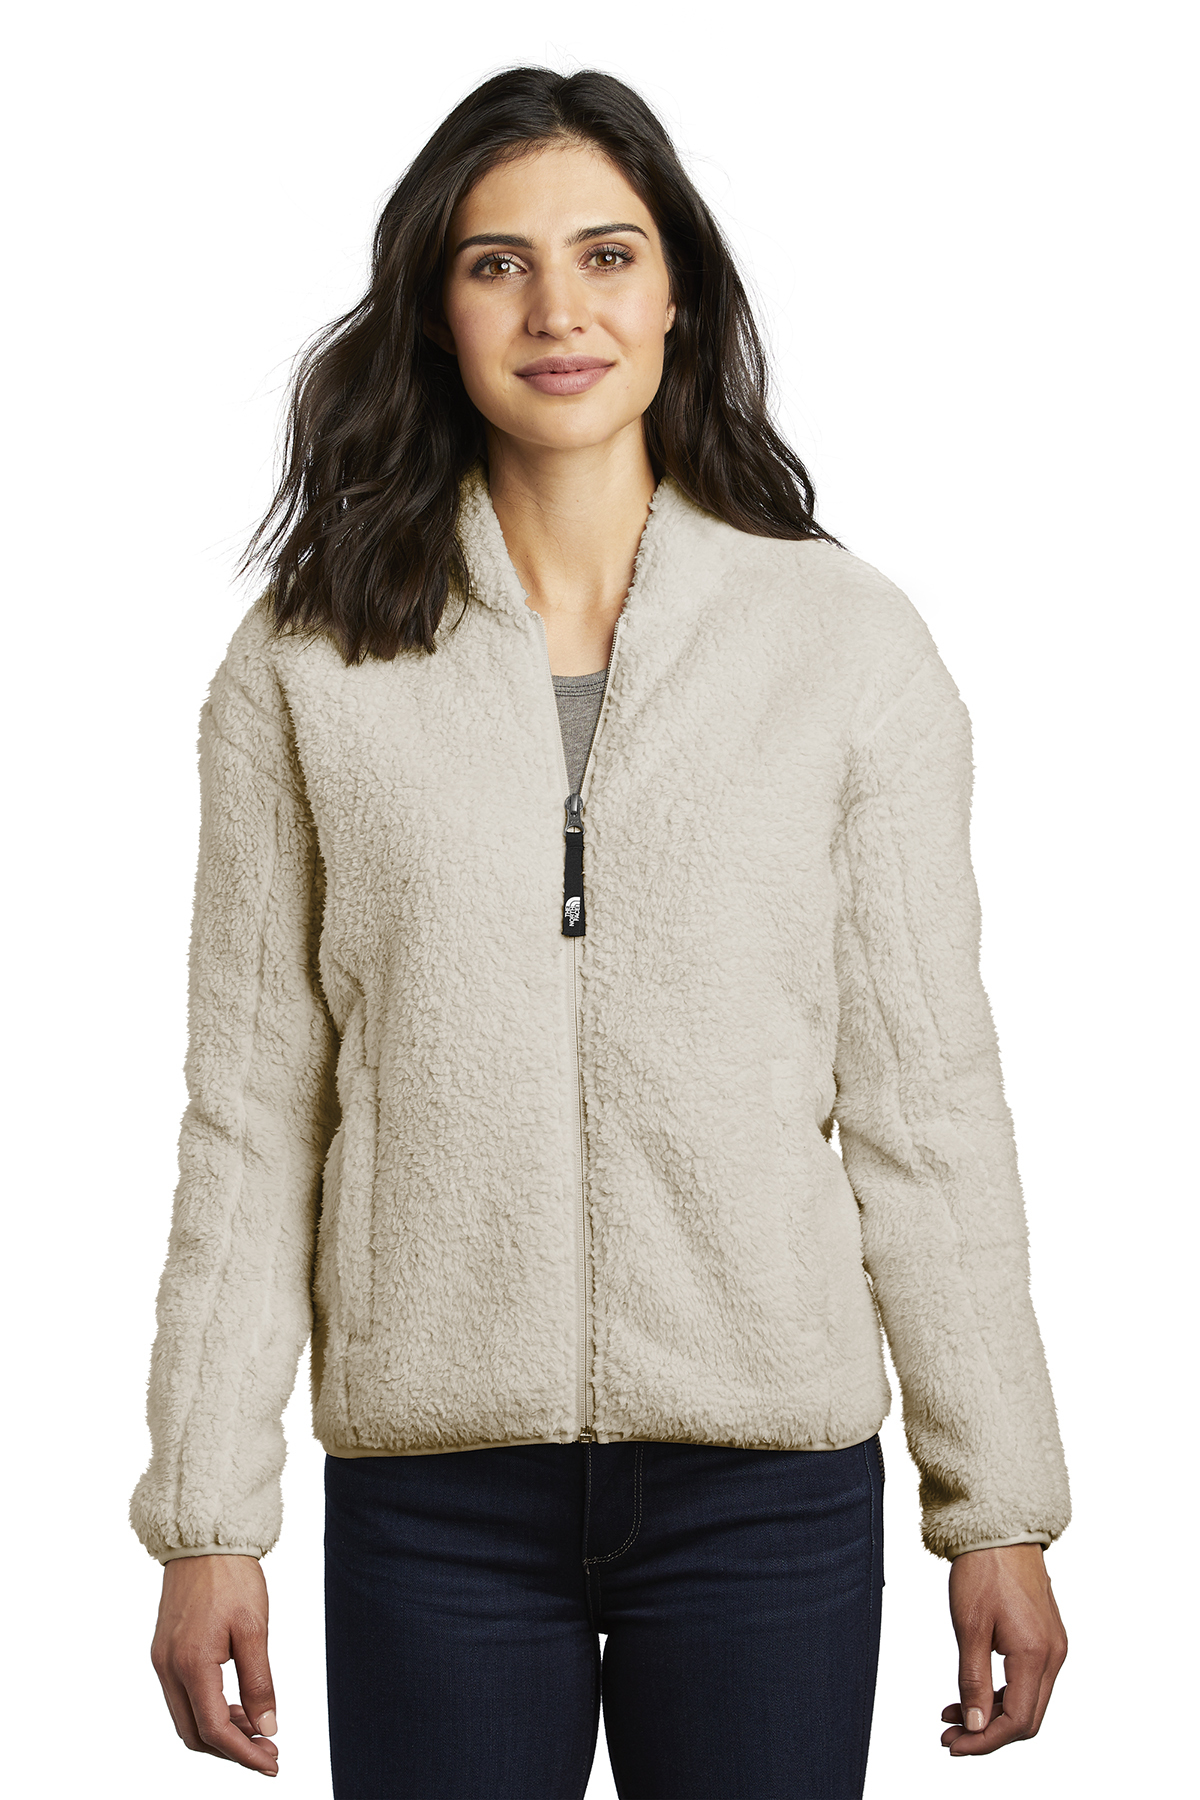 The North Face Ladies High Loft Fleece, Product